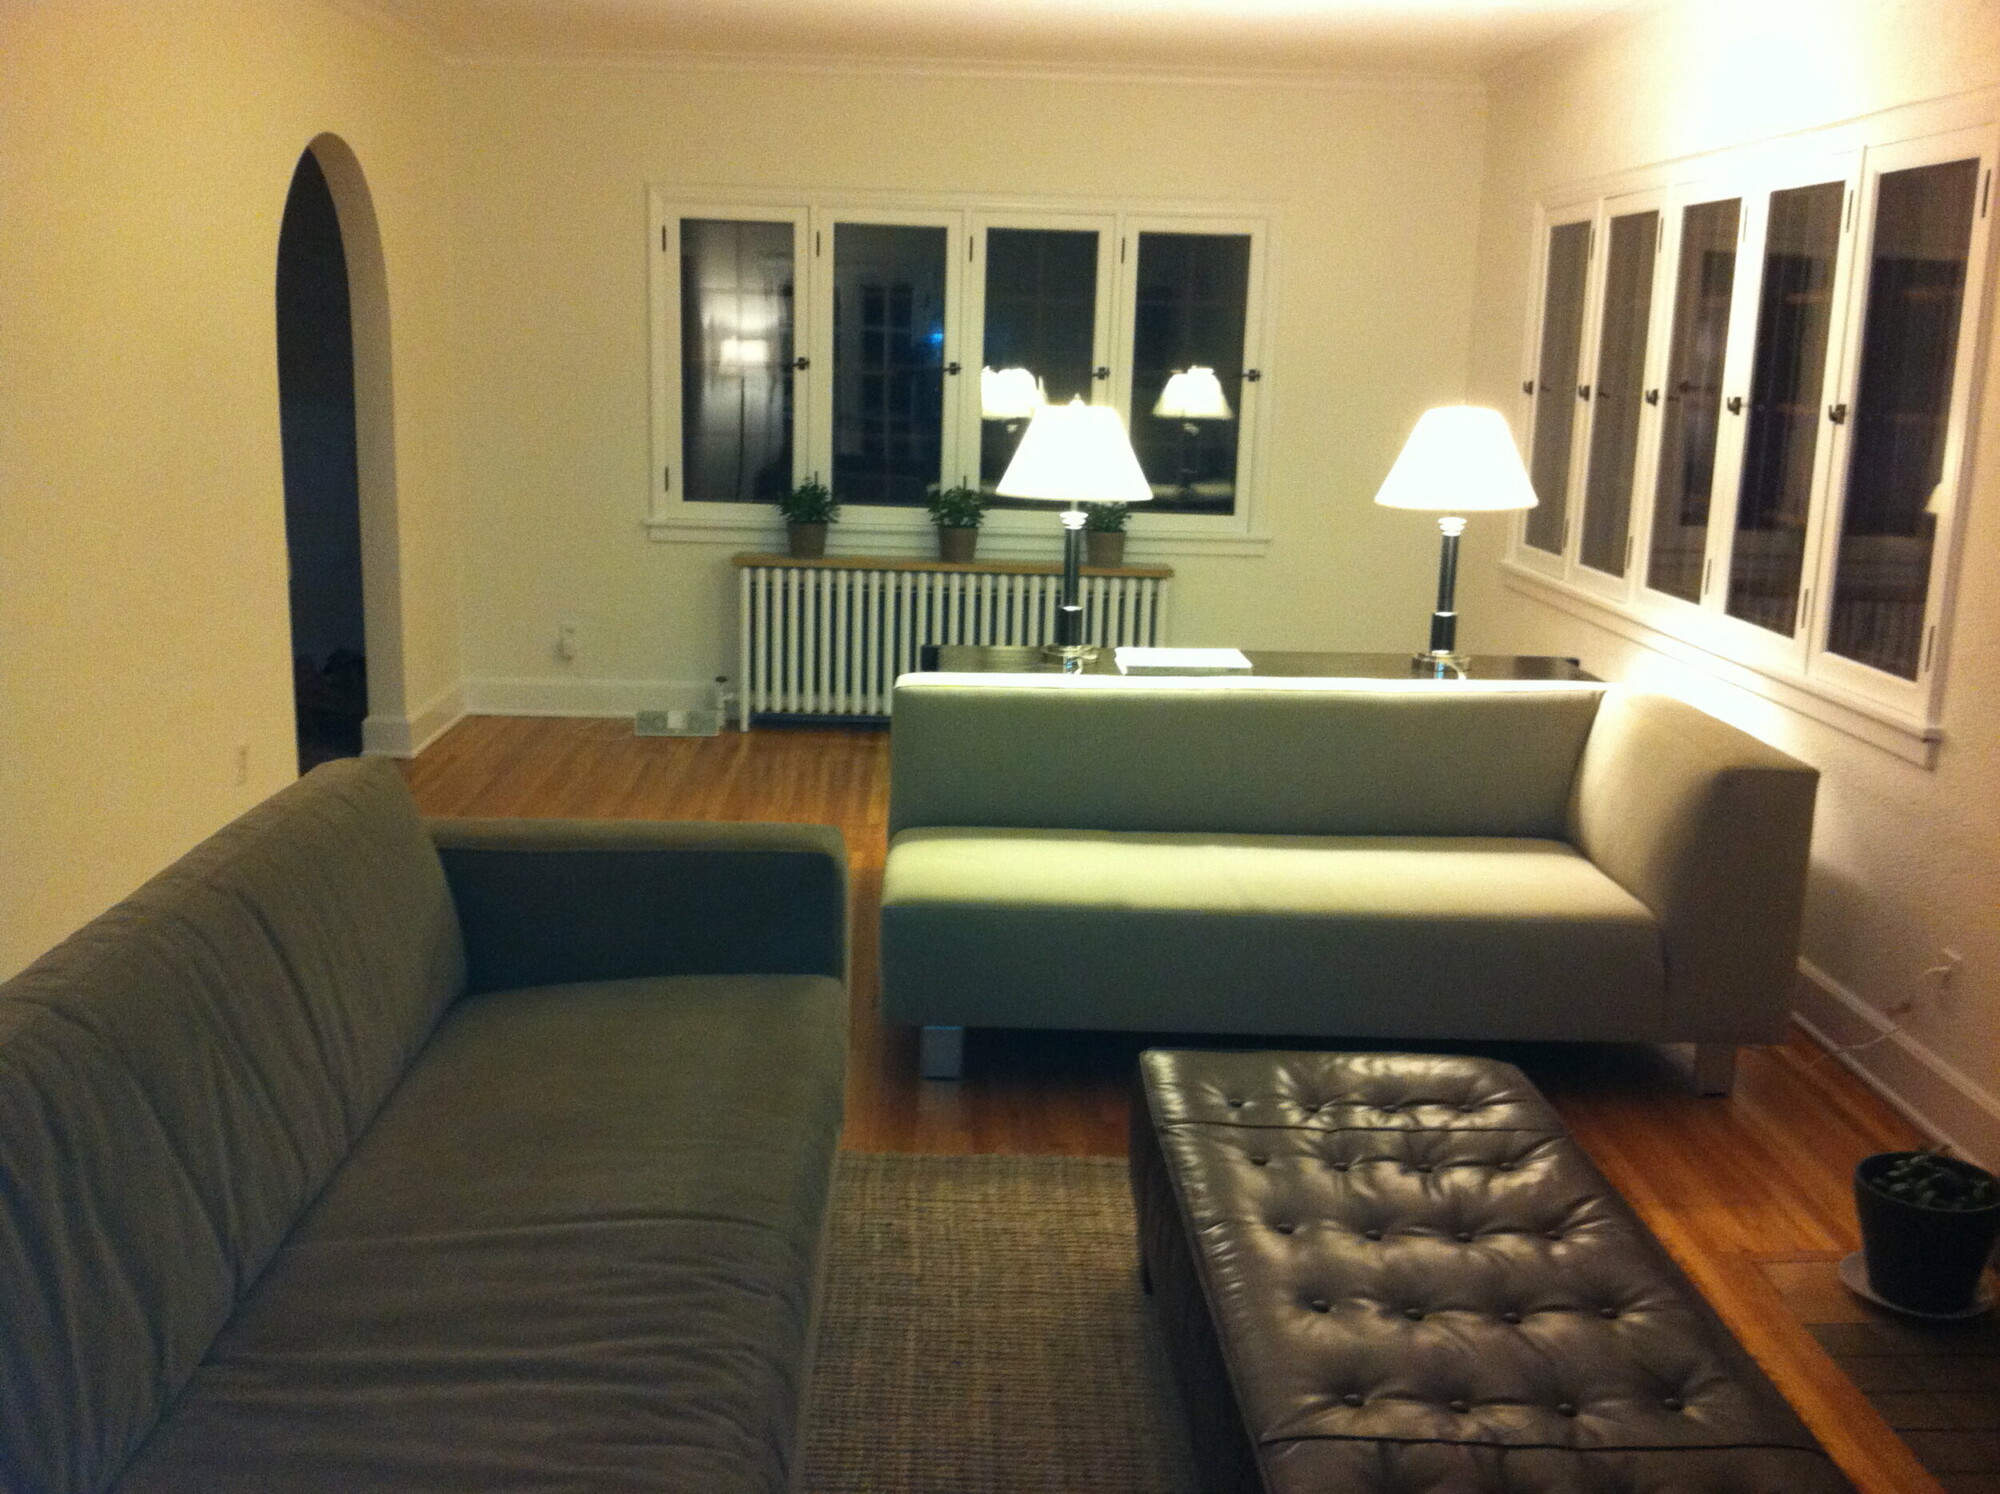 BEFORE - using existing furniture from Brian’s bachelor days!